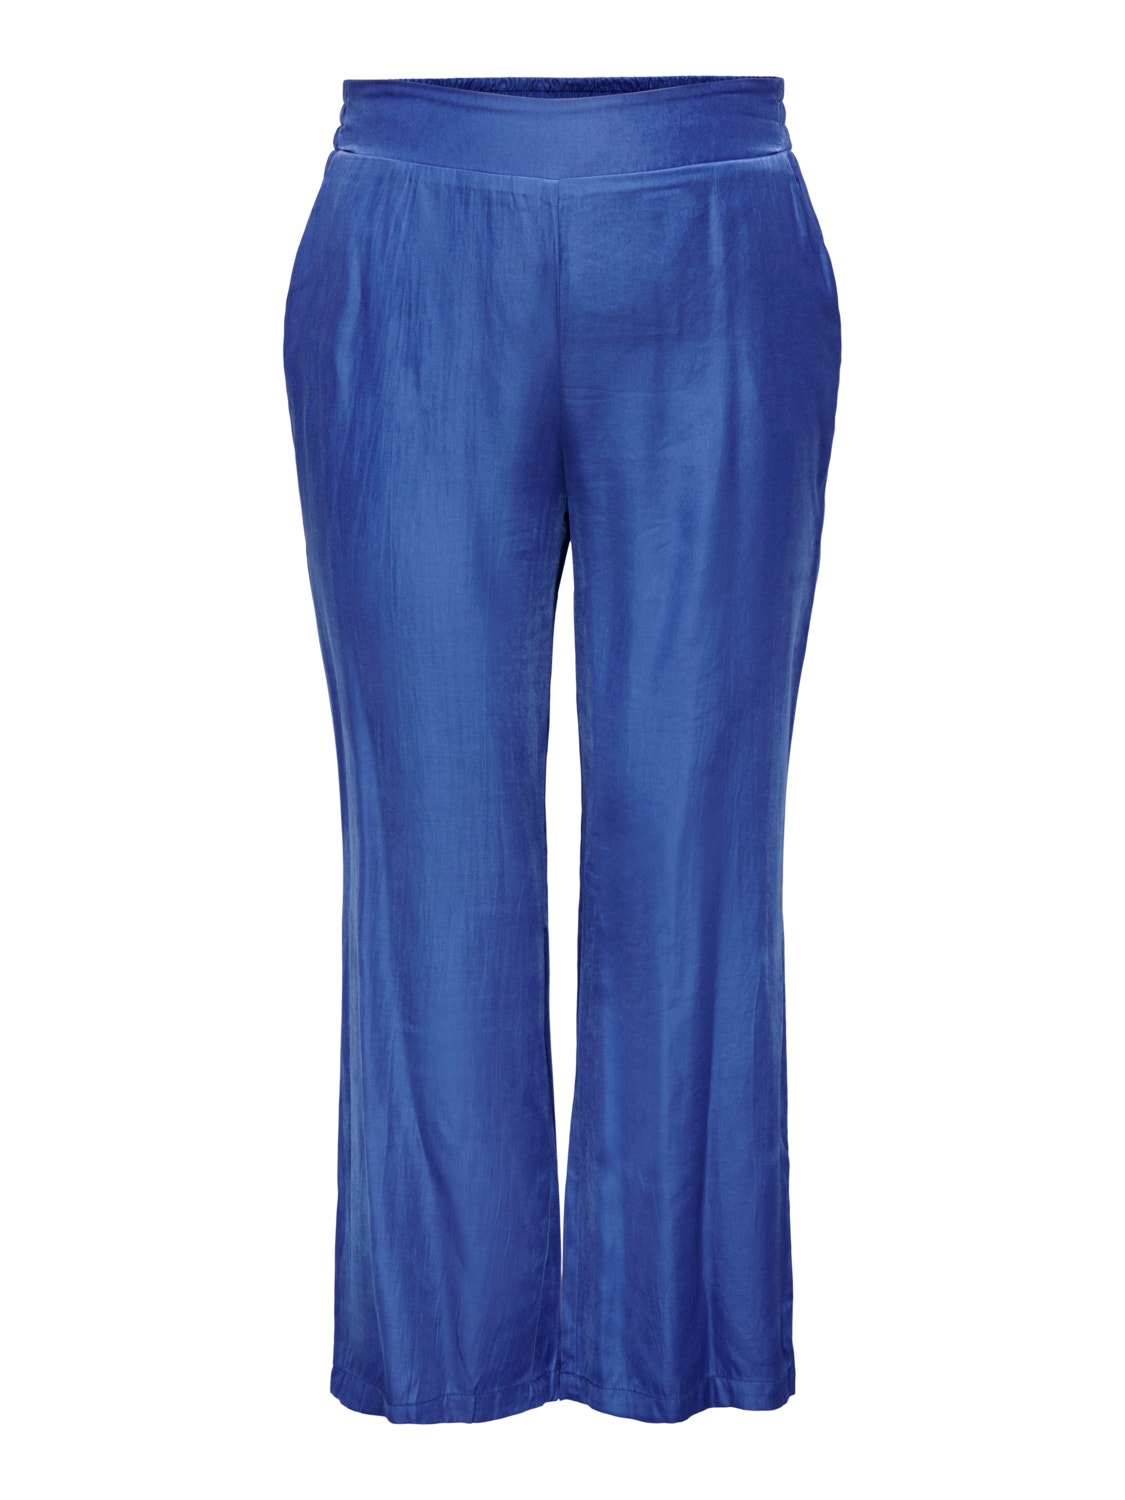 ONLY Curvy low waist trousers -Dazzling Blue - 15291596